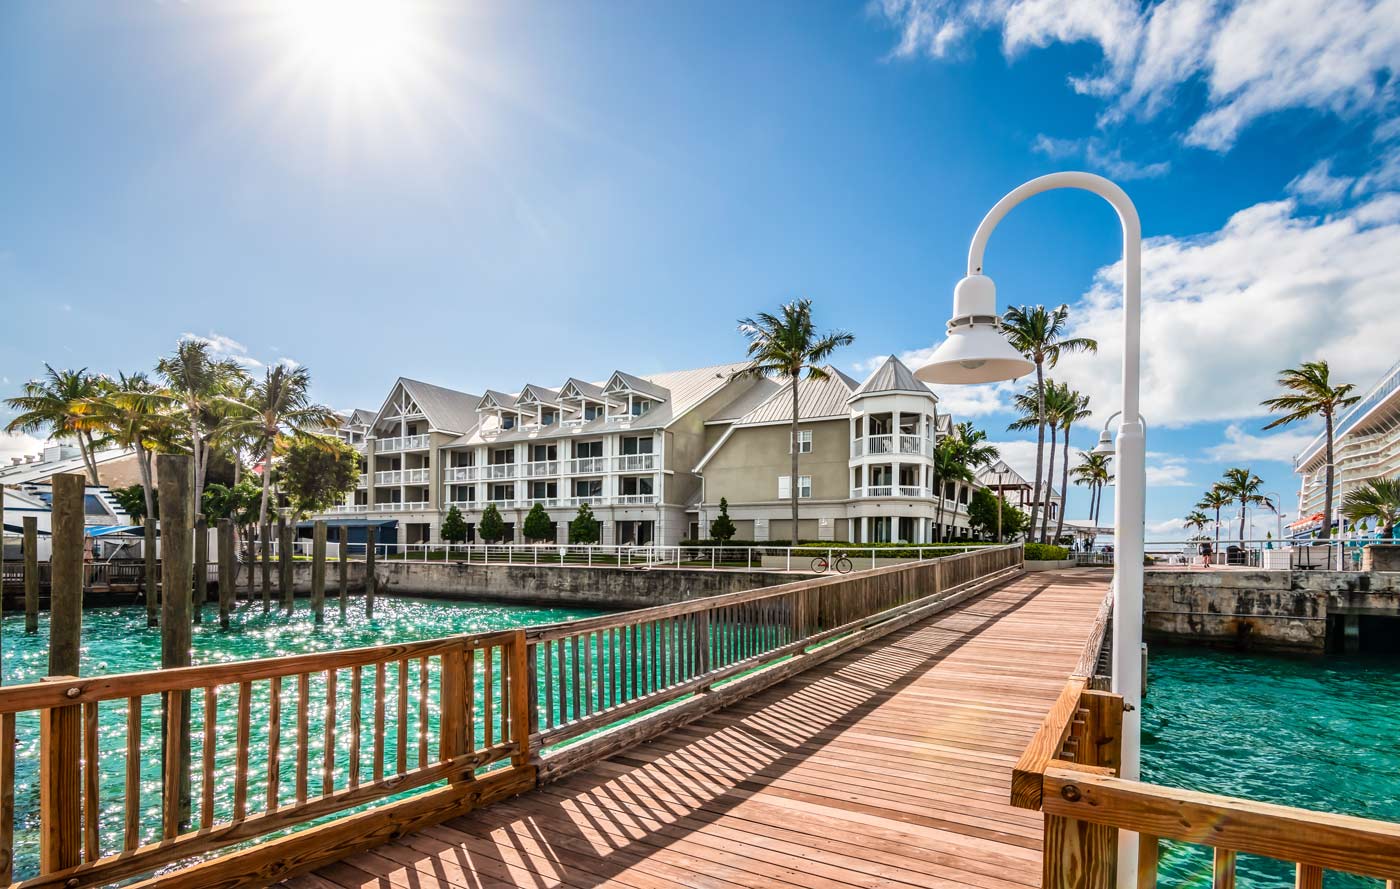 Waterfront Homes For Sale in The Florida Keys including ...